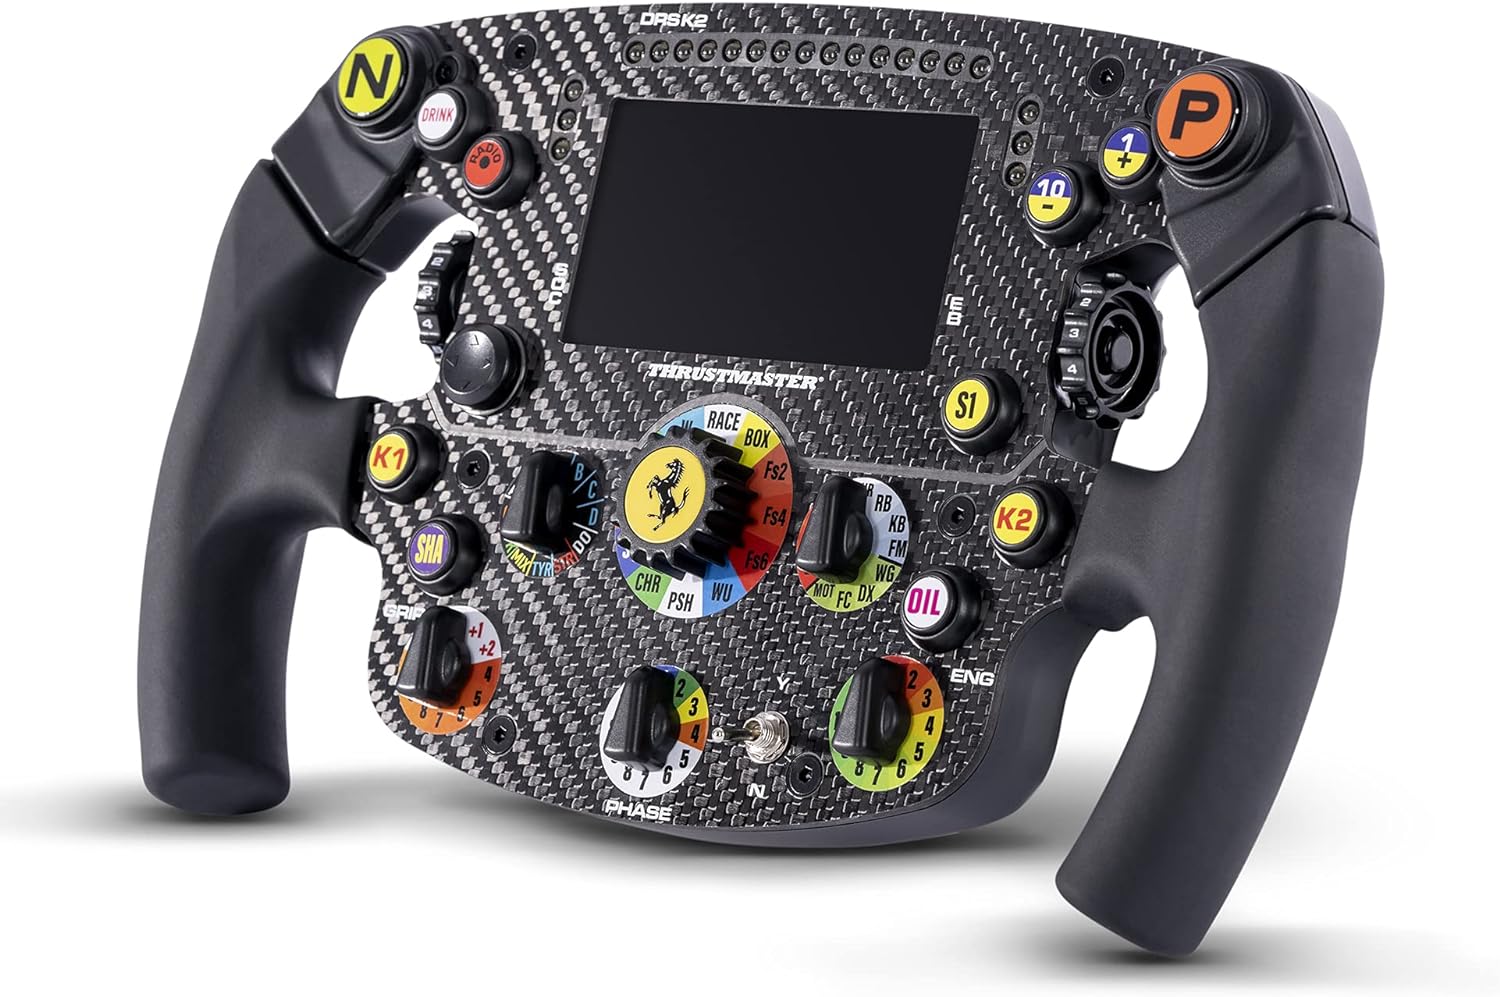 JOYPAD CONTROLLER FOR DRIVING SIMULATORS, Thrustmaster SF1000 Wheel Add-On Ferrari SF1000 Edition For PS5 / PS4 / Xbox Series 